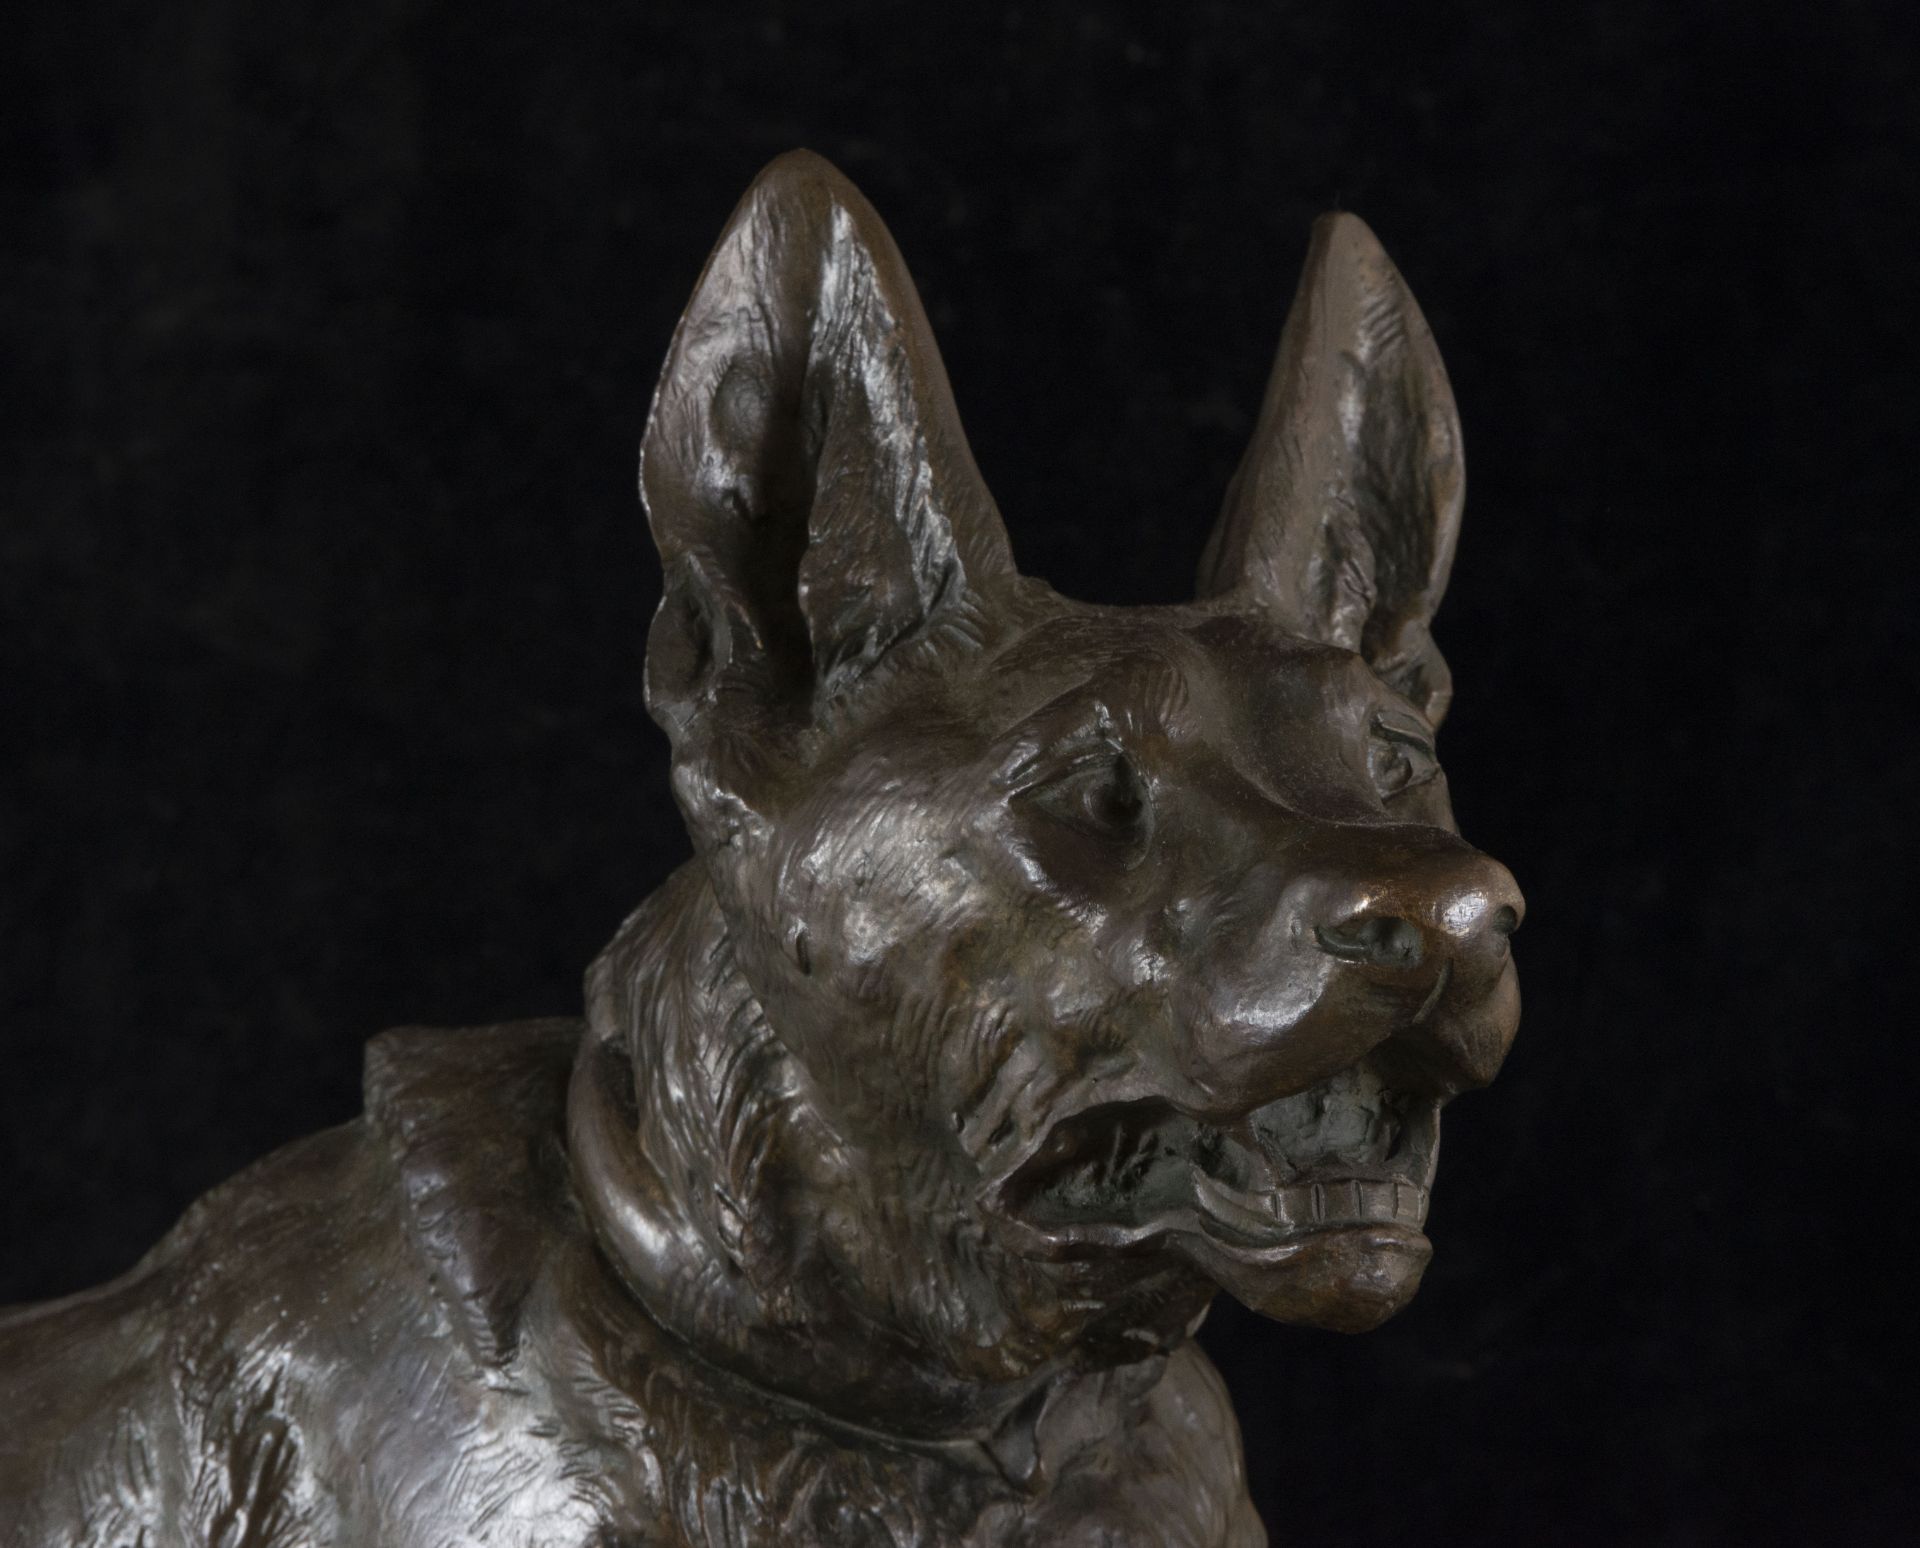 German Shepherd in Bronze, signed on the base Thomas Cartier (1879-1943), 1920s - Image 2 of 4